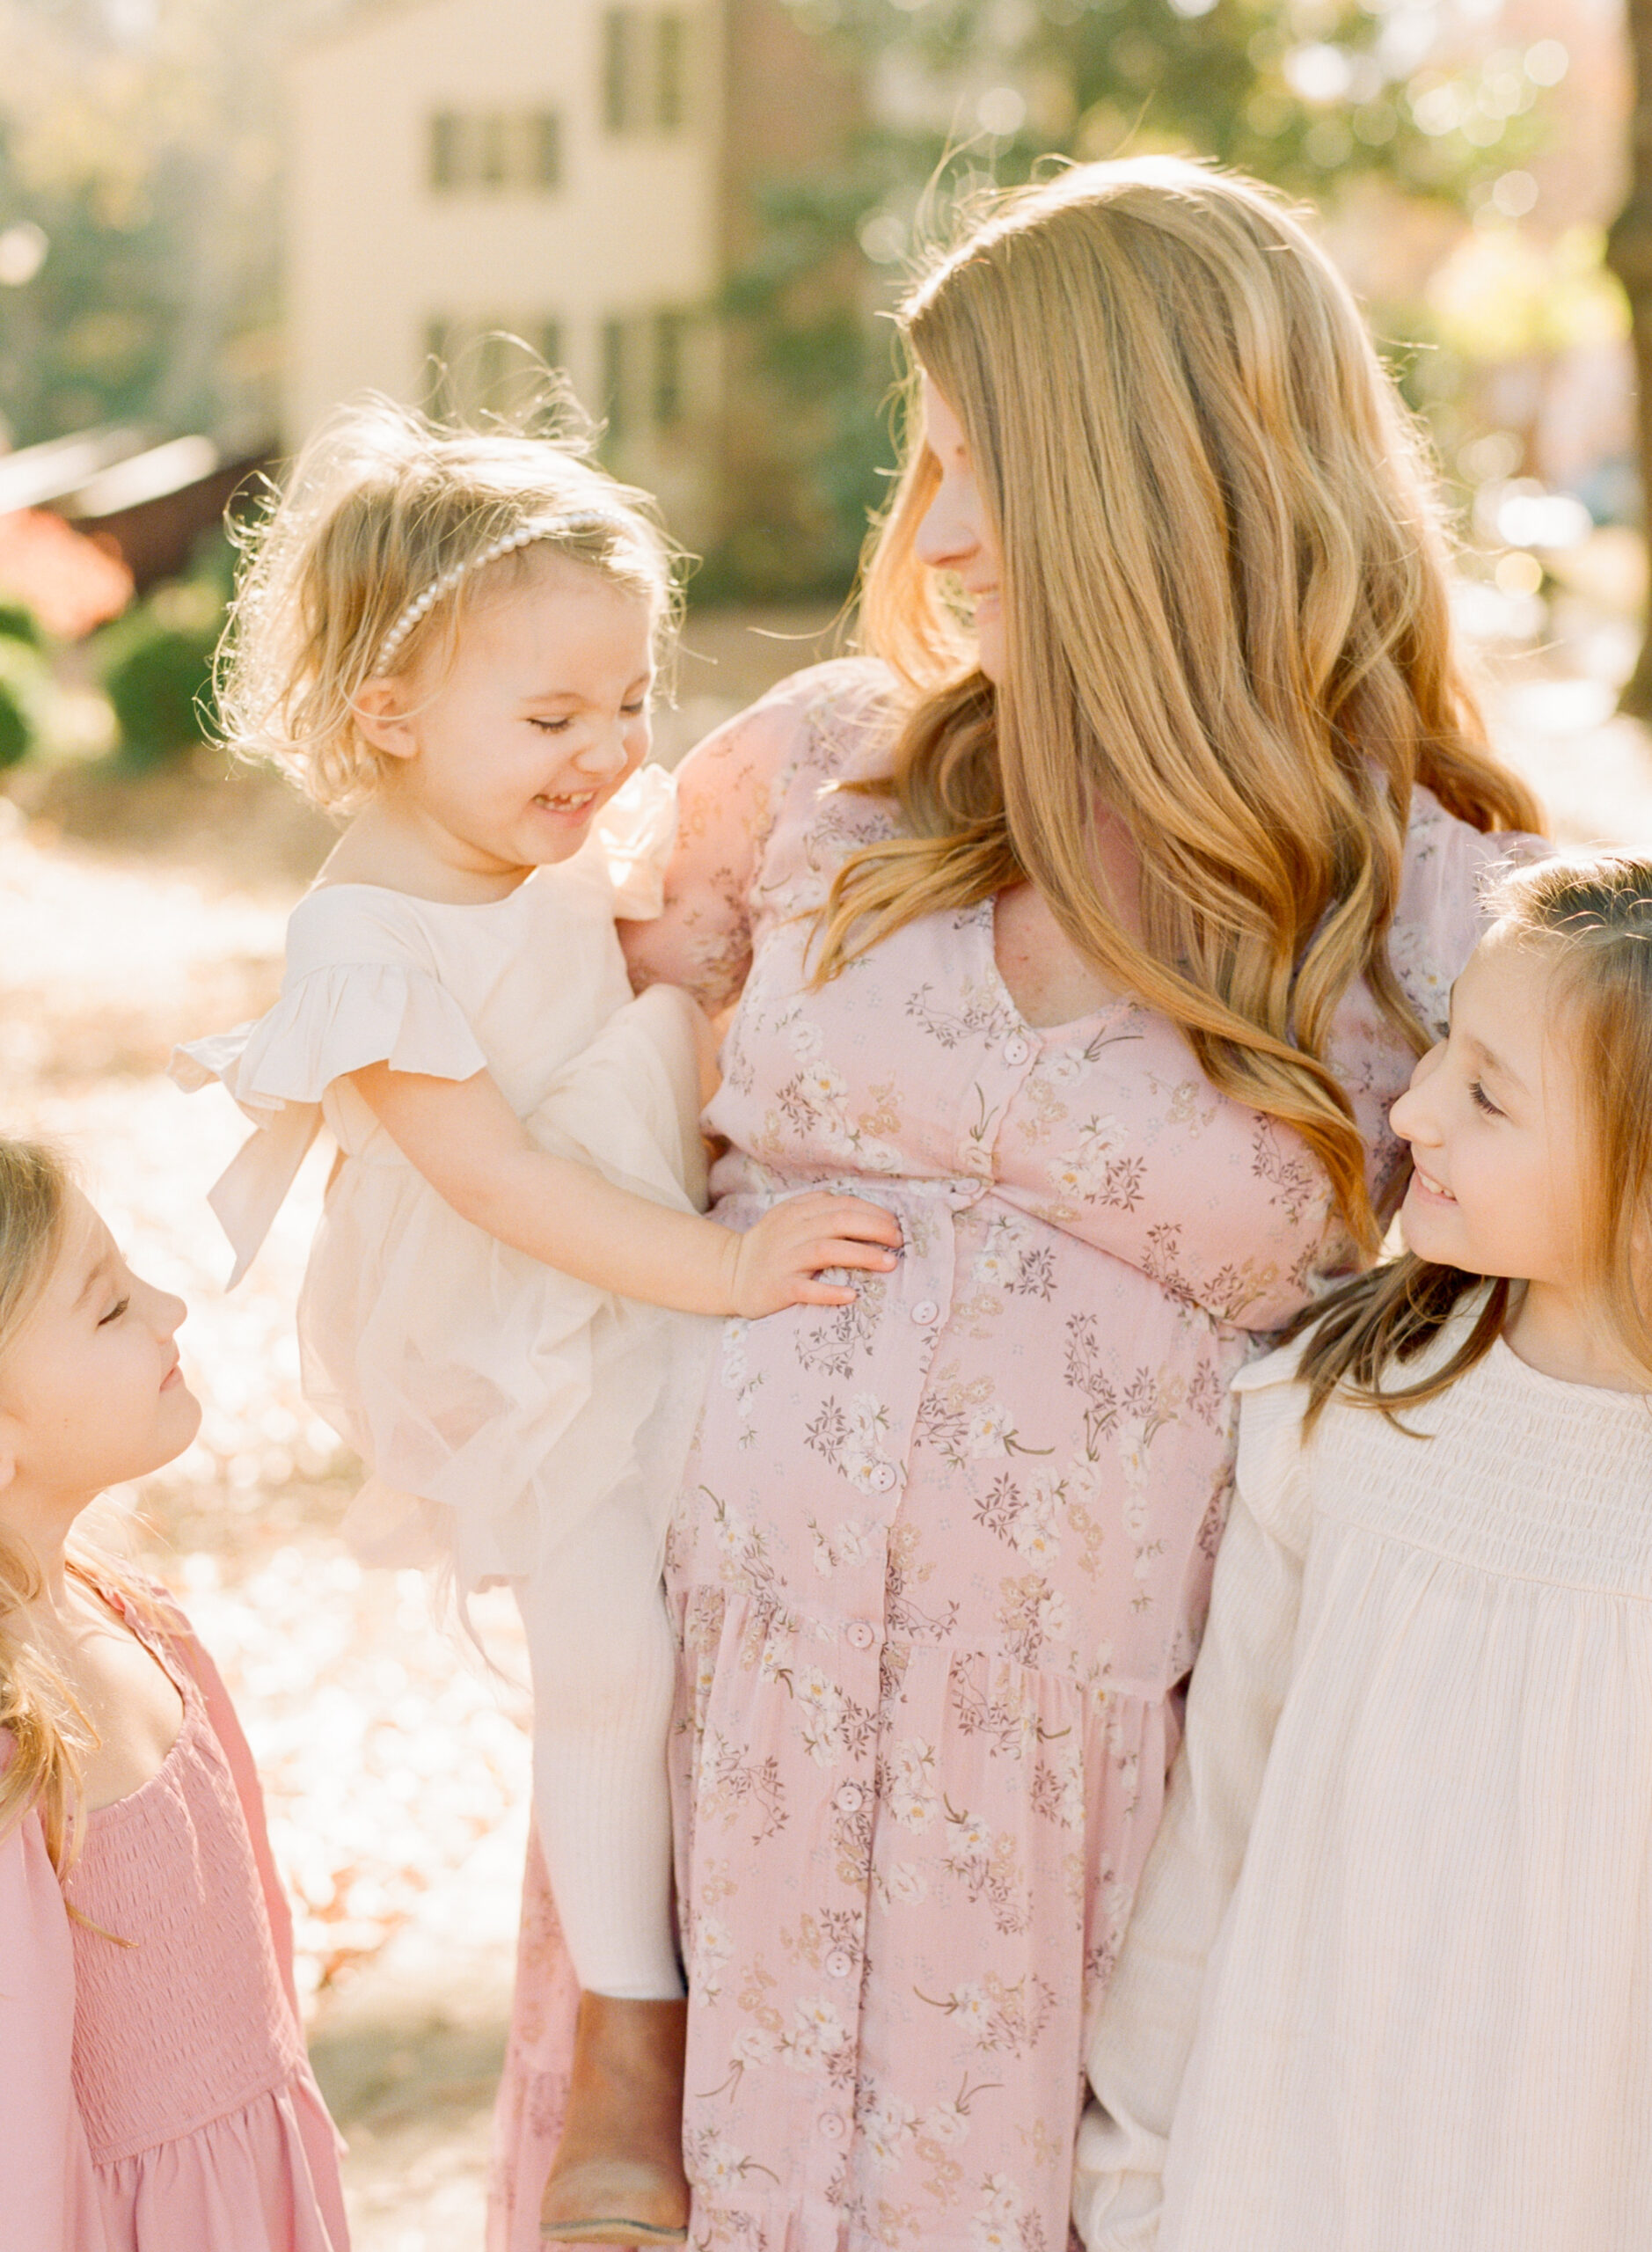 Toddler sits on mom’s pregnant belly and laughs. Check out these Reasons to take maternity photos by Raleigh maternity photographer A.J. Dunlap.